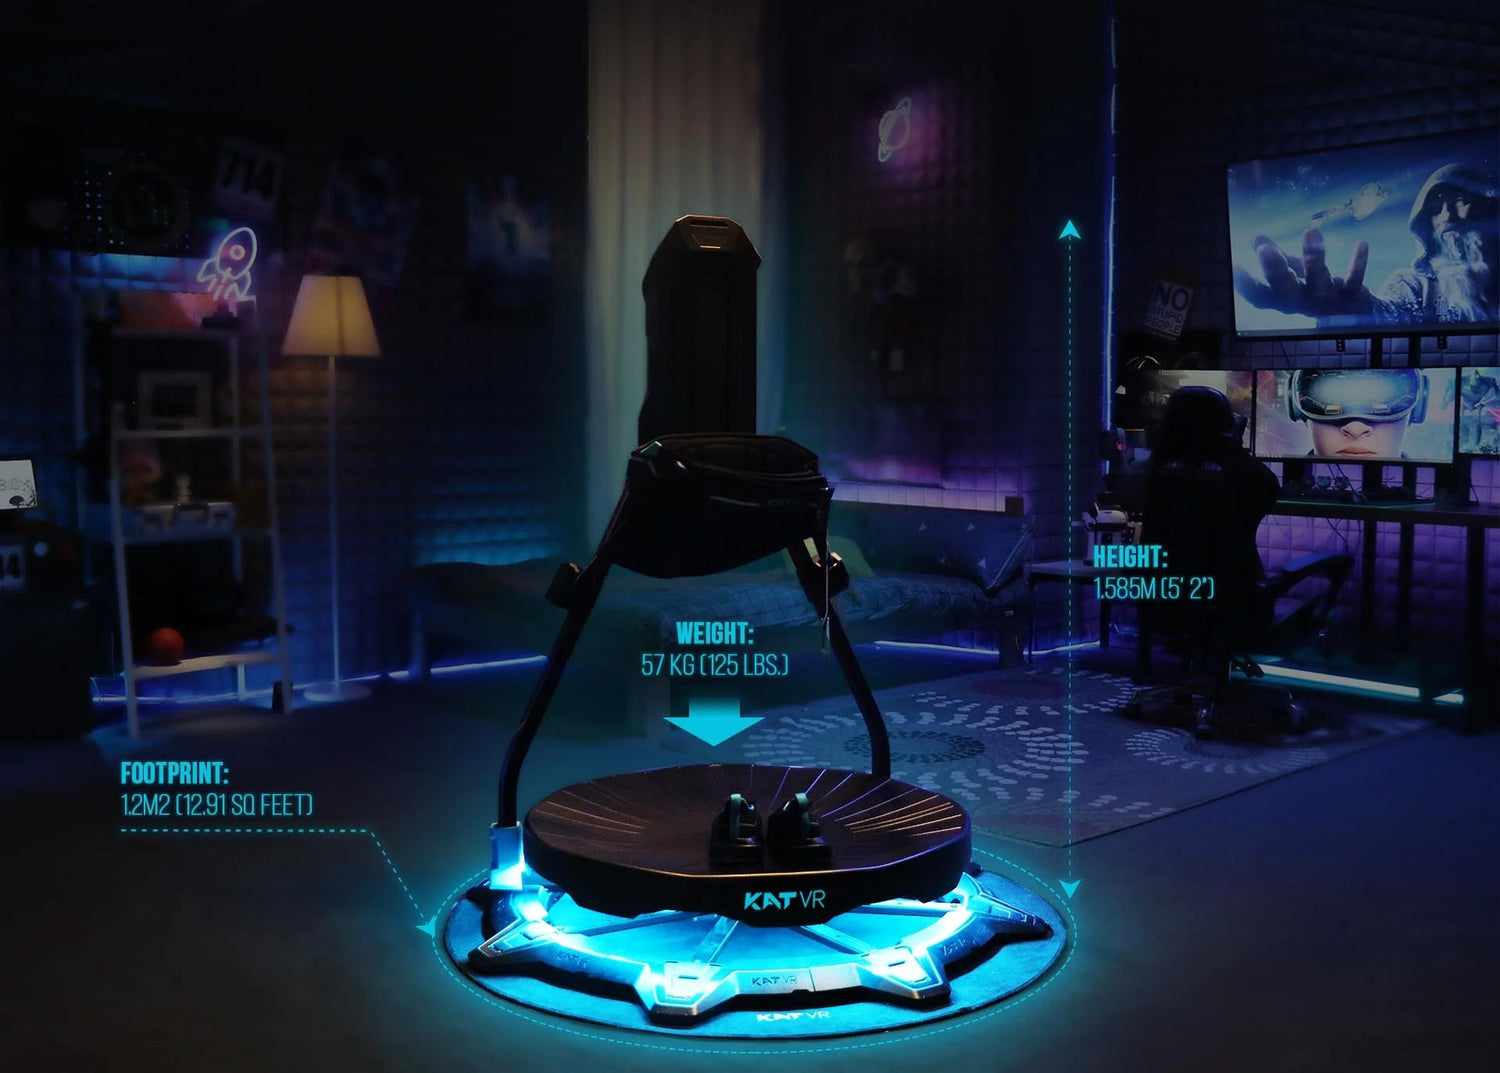 The KAT Walk C2 VR treadmill seamlessly incorporated into a modern home gaming setup, serving as the ultimate VR gaming centerpiece.  | Knoxlabs VR marketplace | VR Headsets, VR Accessories, VR Treadmills